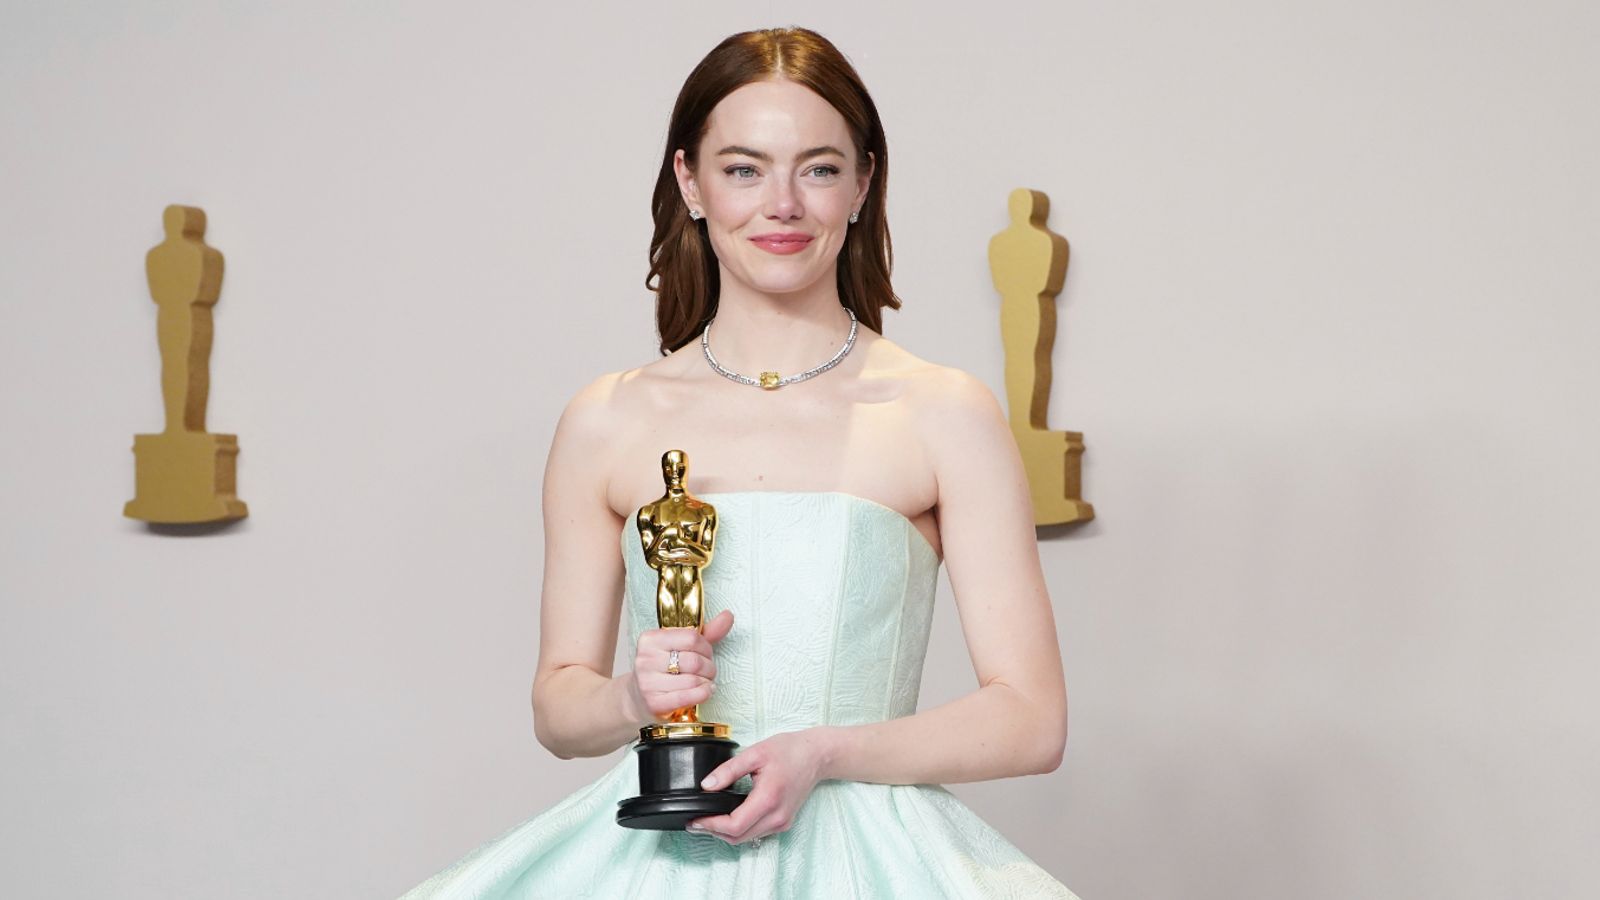 Emma Stone: Actress says she 'would like to be' ca